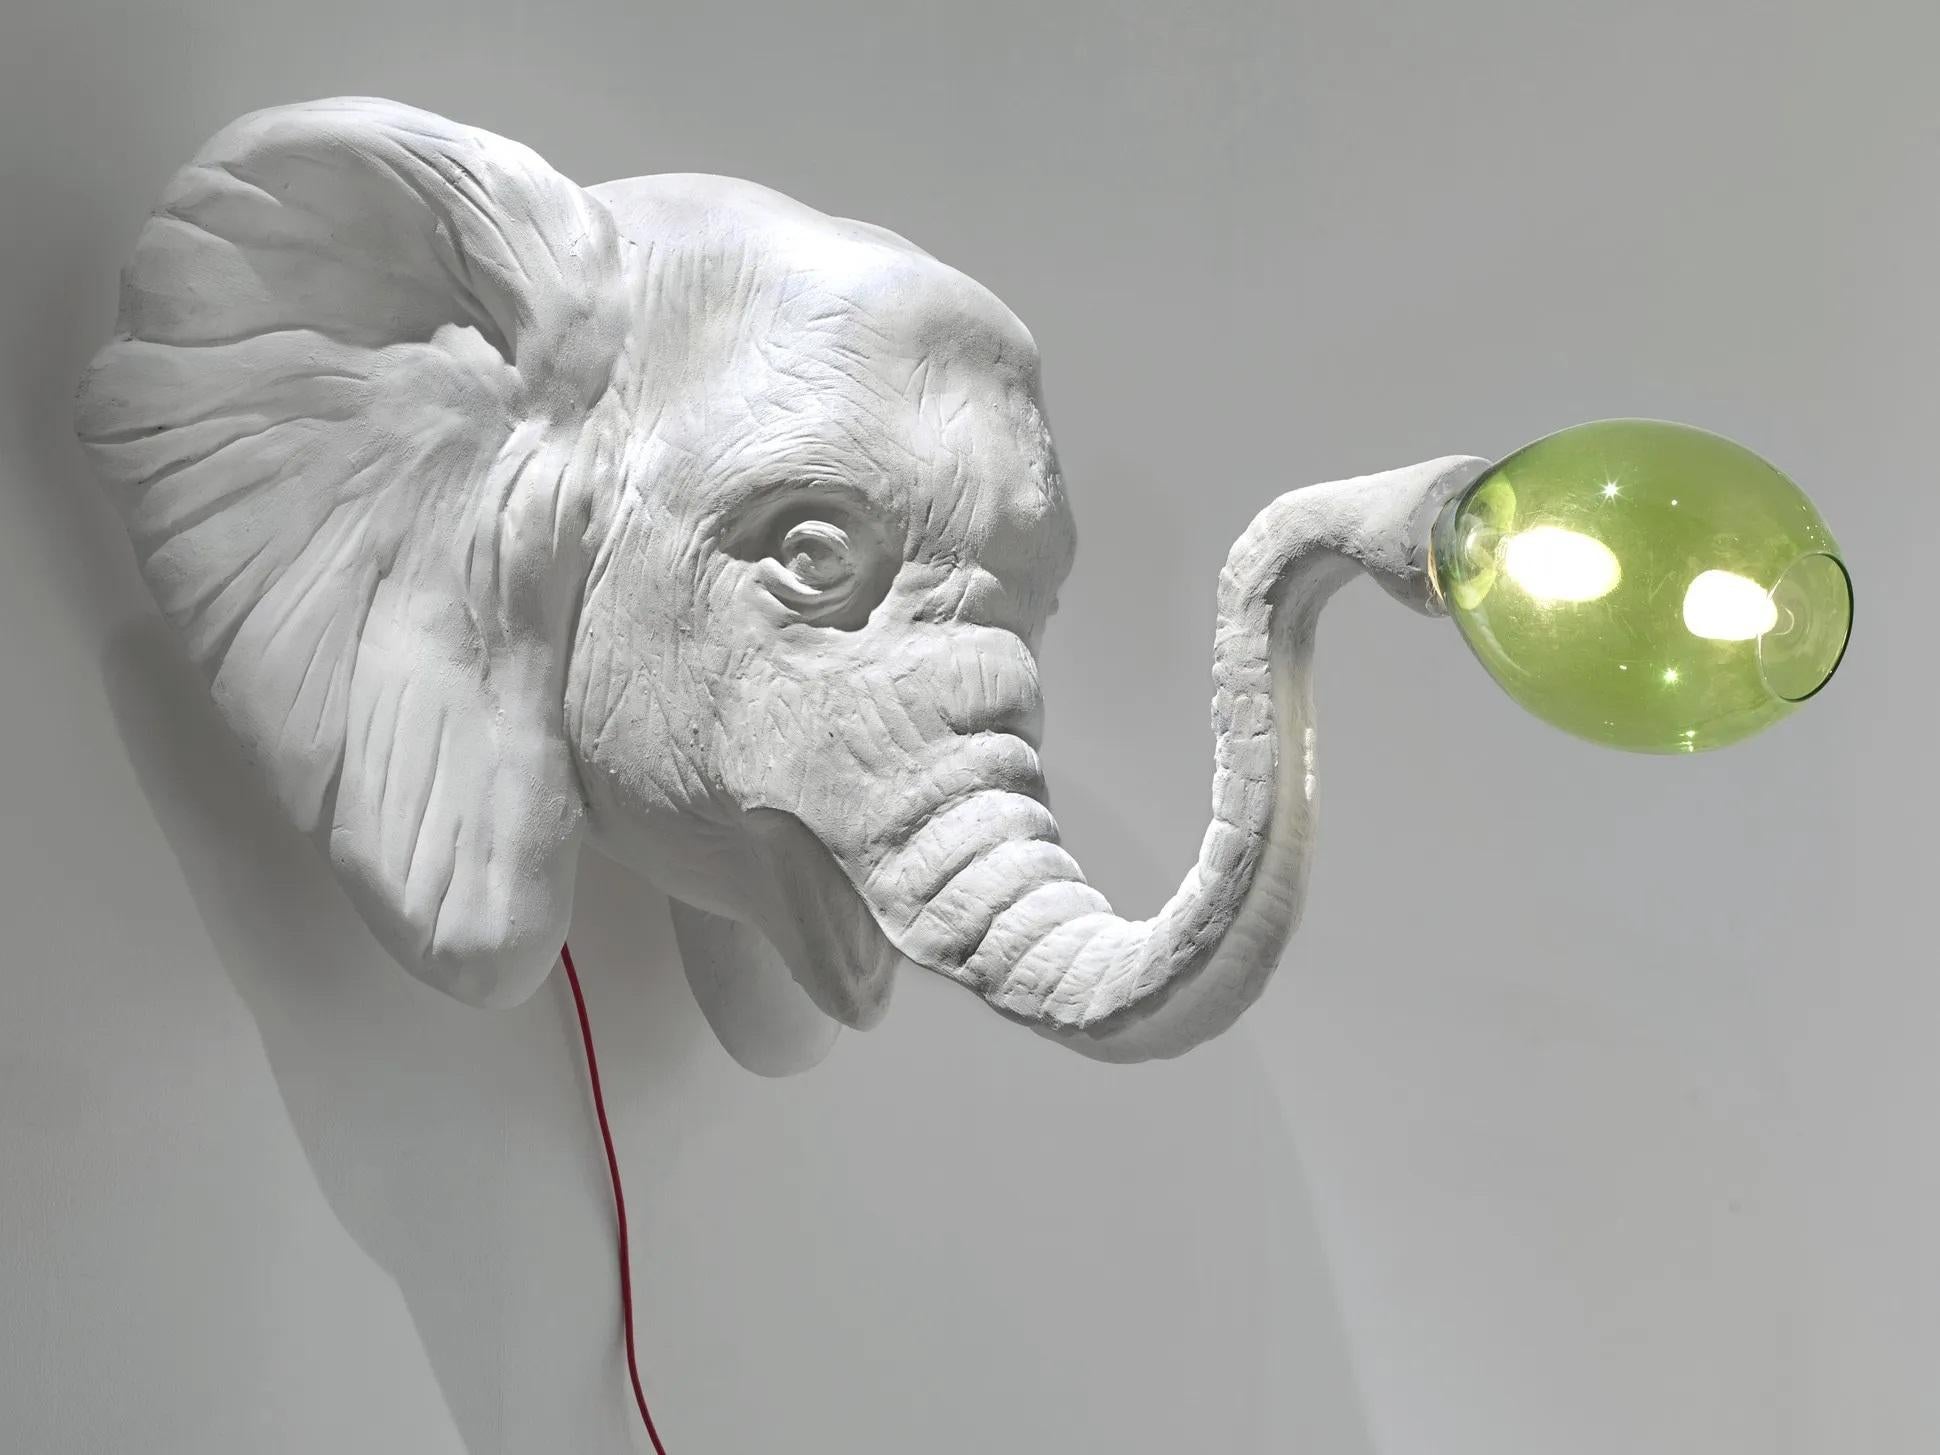 Light elephant wall lamp by Imperfettolab
2011
Designer : Verter Turroni
Dimensions: W 100 x D 135 X H 95 cm
Materials: Fibreglass

Nature and its creatures immersed in a dreamy and playful atmosphere are the inspiration for this unique lamp.